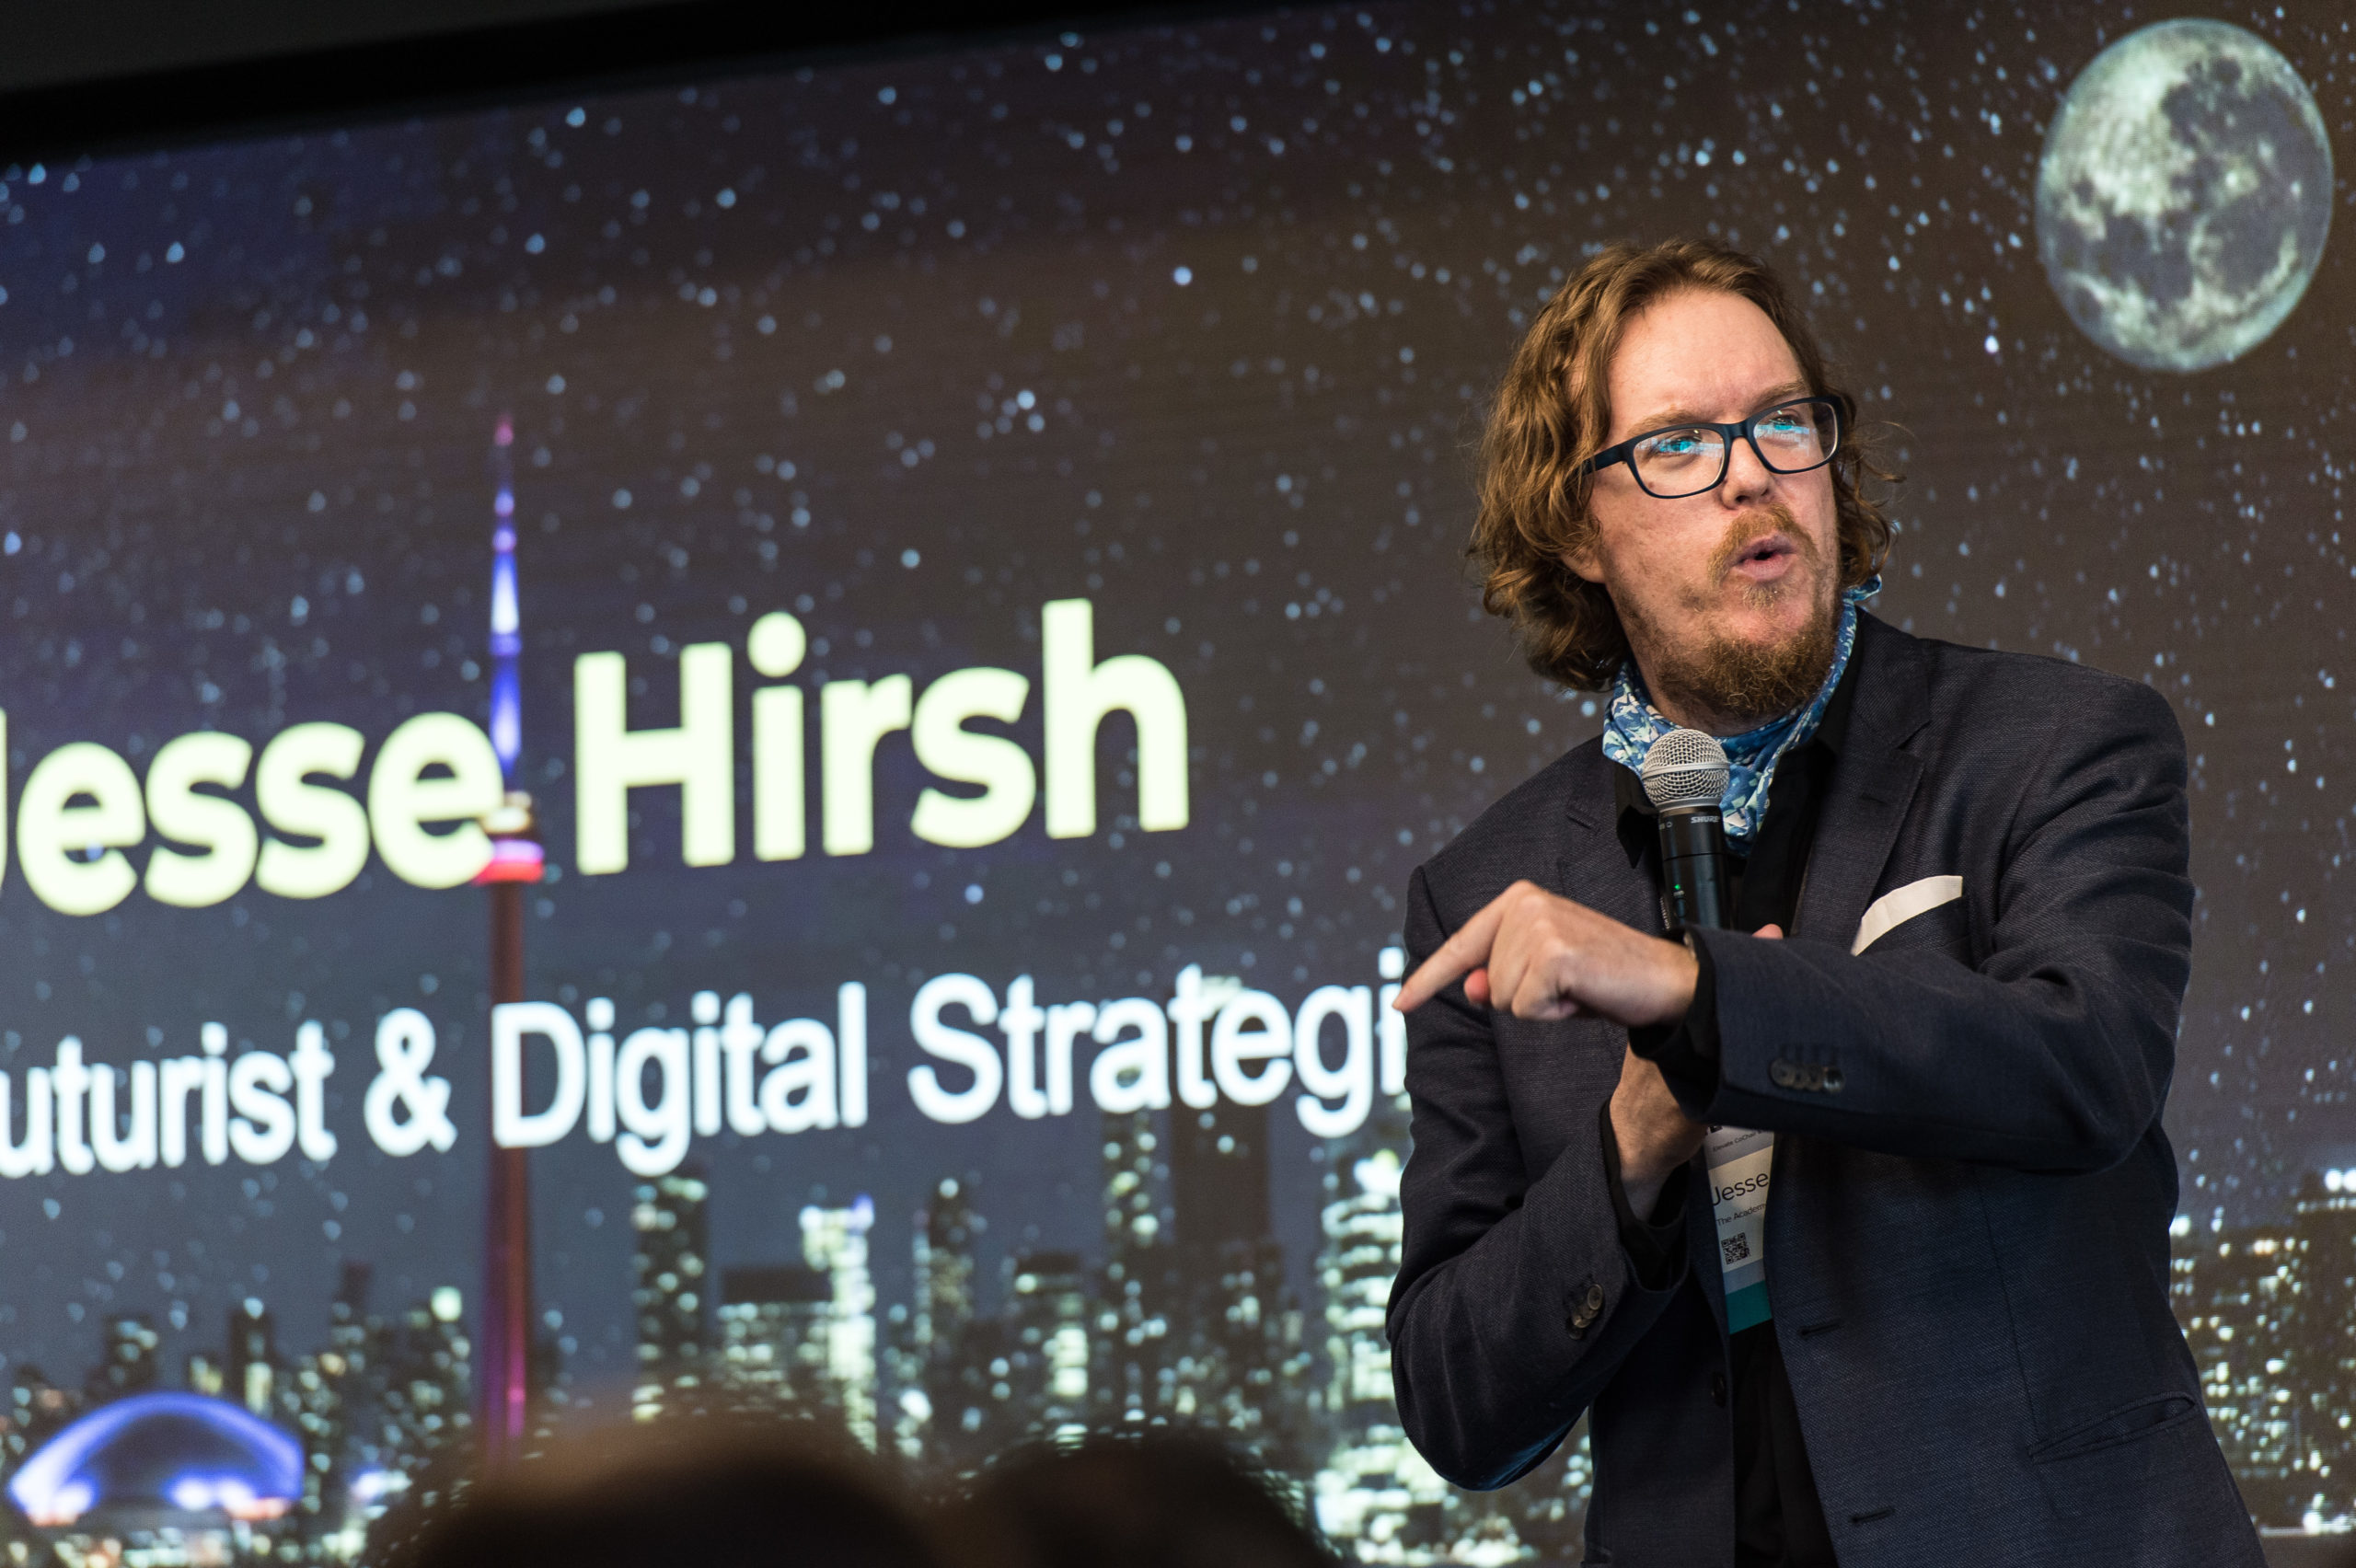 Jesse Hirsch speaks in front a screen bearing his name and the title "Futurist & Digital Strategist." Jesse is a white man with curly dark blonde hair and a beard and mustache. He is wearing glasses with thick black frames, a navy suit jacket over a black shirt and blue patterned scarf. He holds a microphone in his right hand and is gesturing with his left.